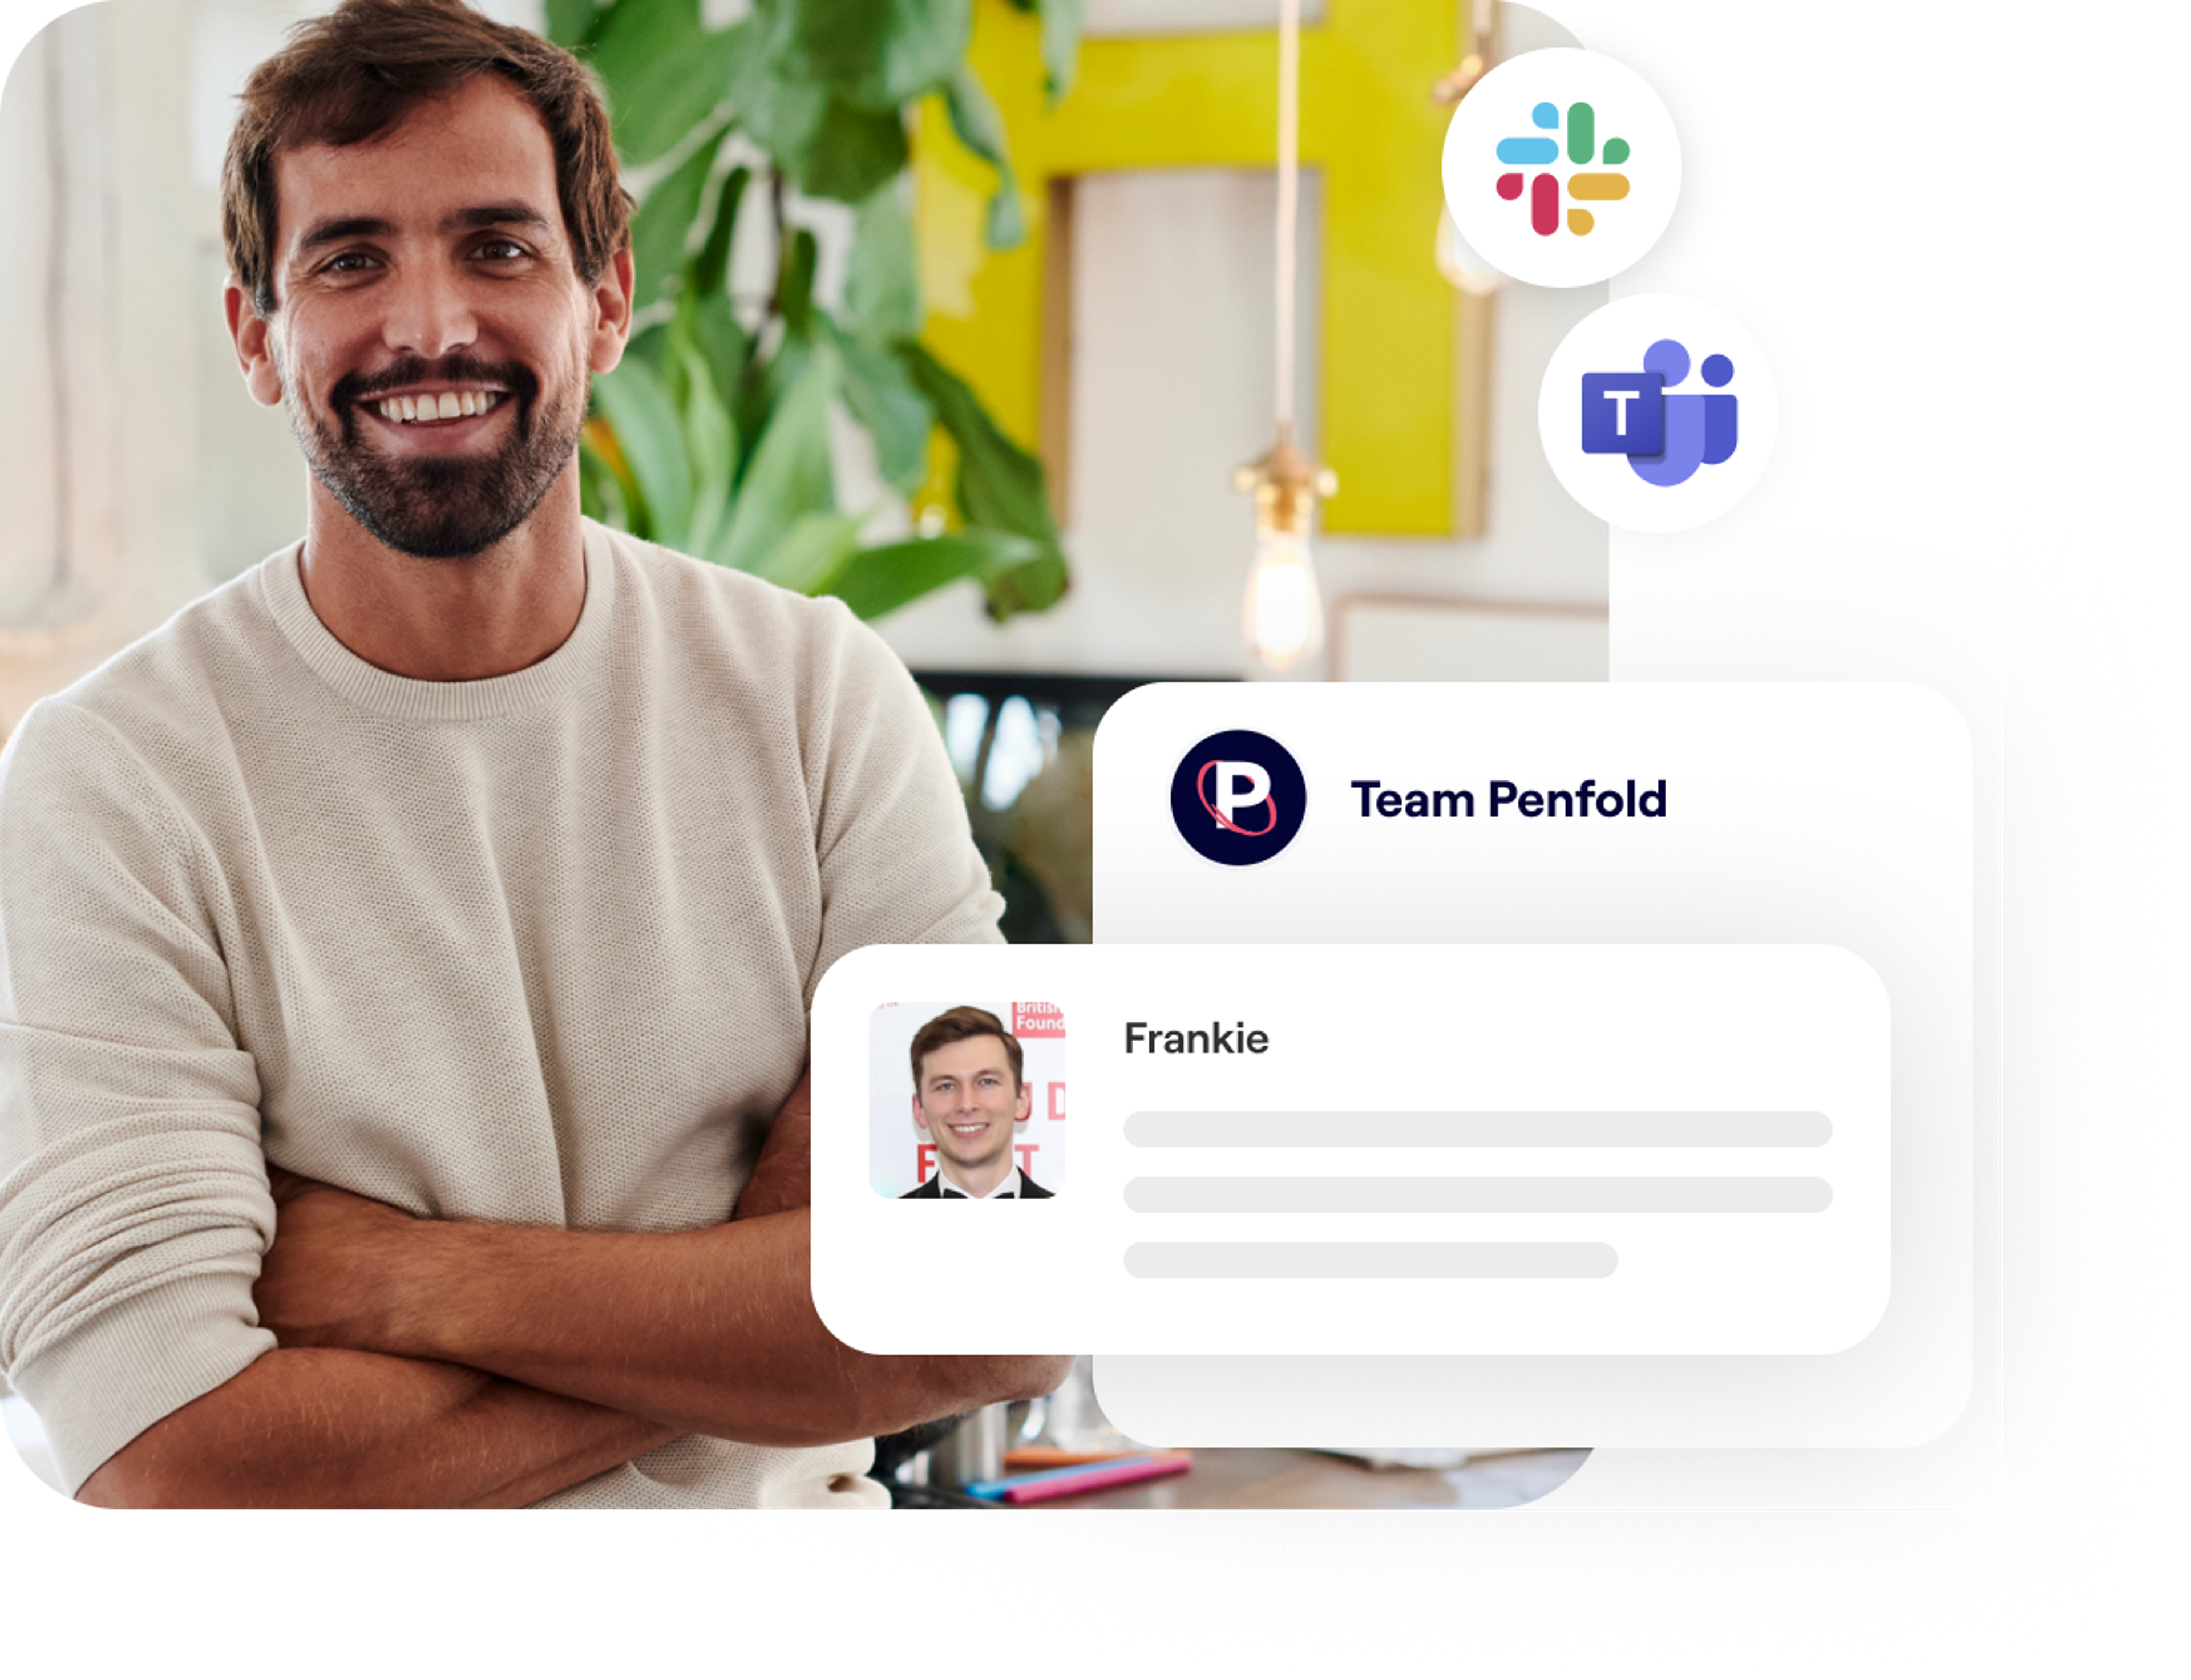 A photo of a man smiling and excerpts of Penfold support chat screens